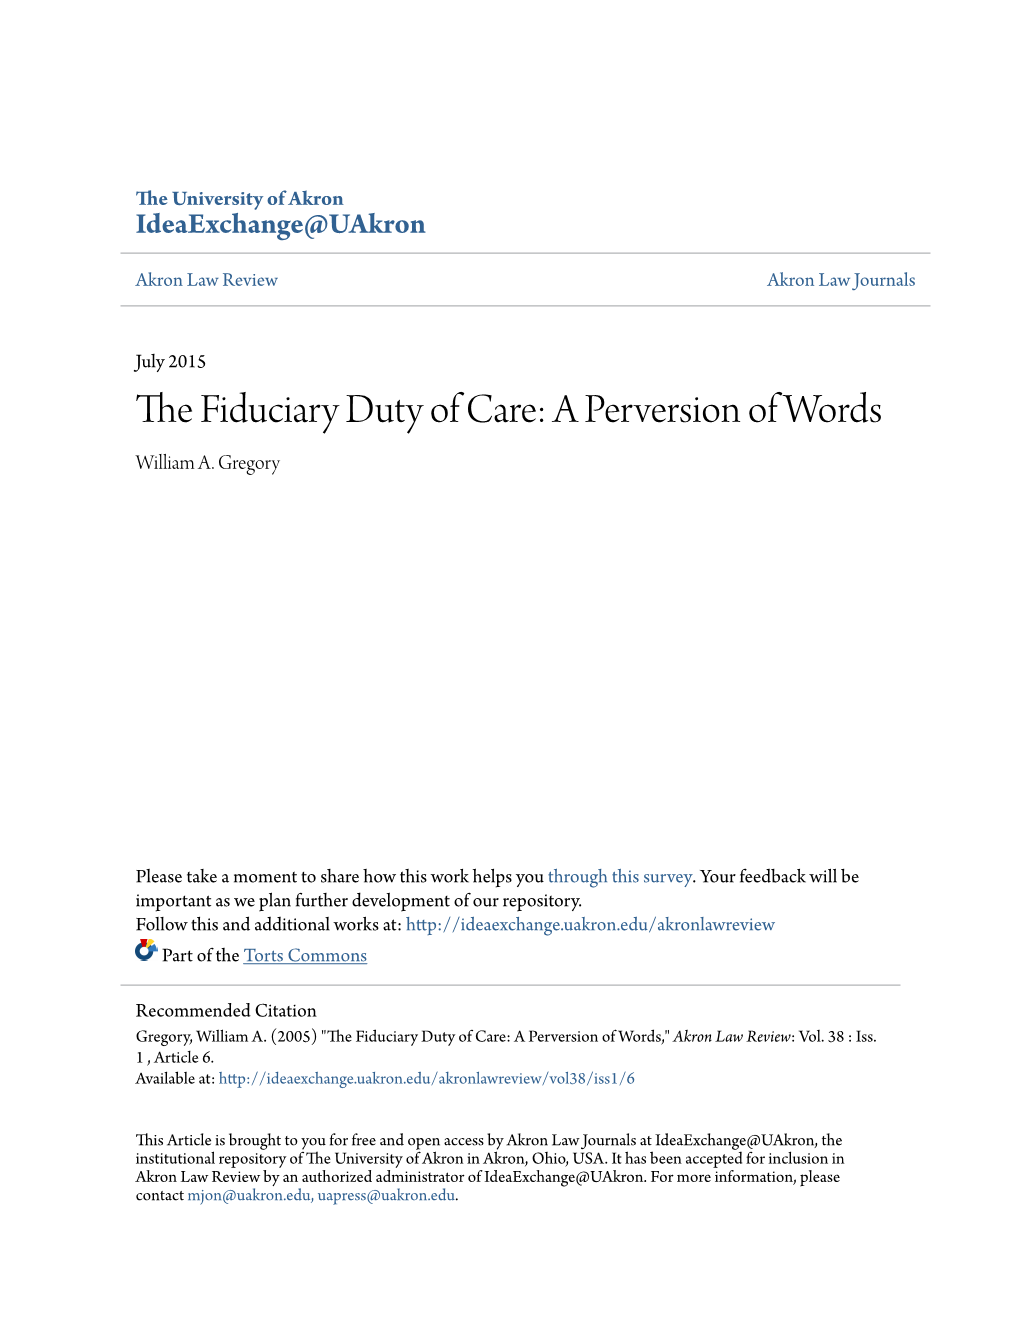 The Fiduciary Duty of Care